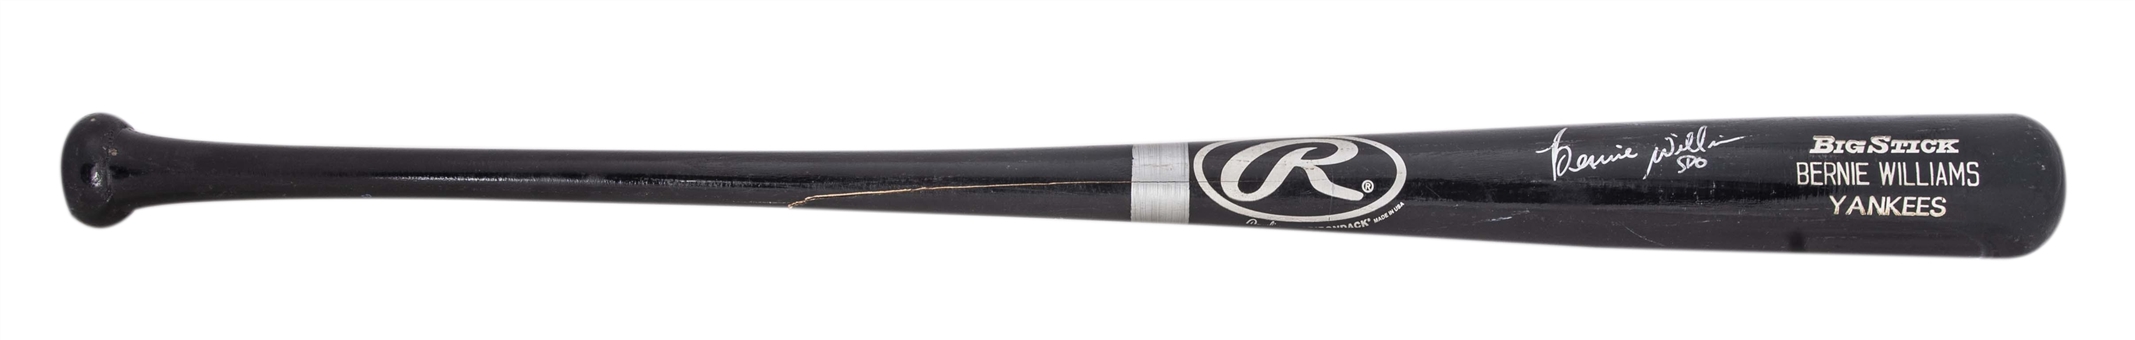 1998 Bernie Williams Game Used & Signed Rawlings DW20 Model Bat From The Willie Randolph Collection (PSA/DNA, Randolph LOA & Beckett)